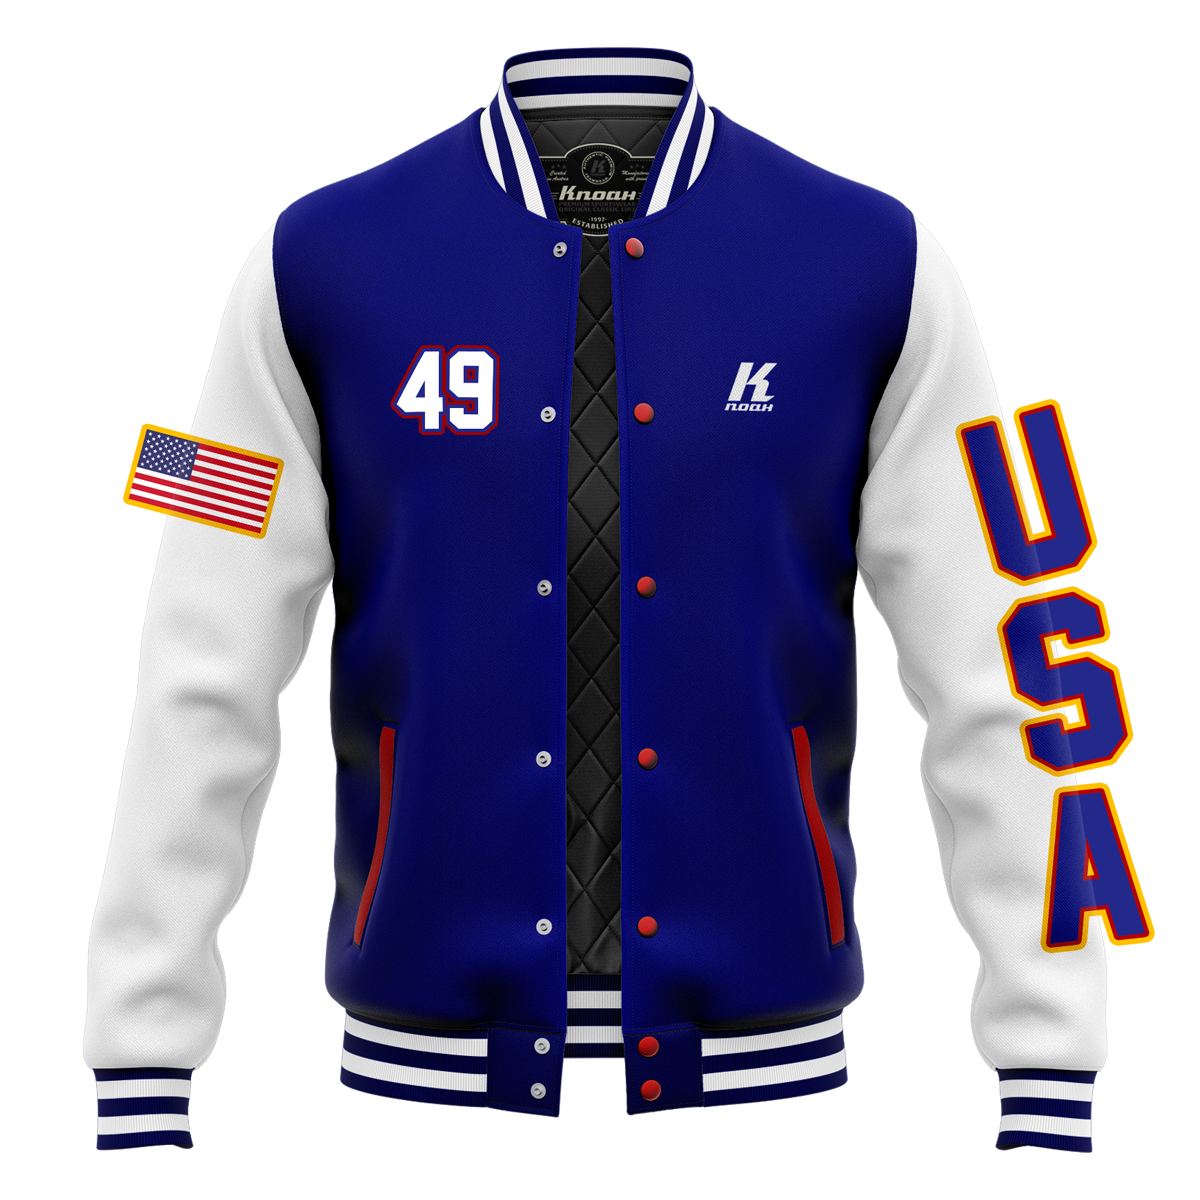 Day 13: "Stars and Stripes" Authentic Varsity Jacket with Playernumber/Initials